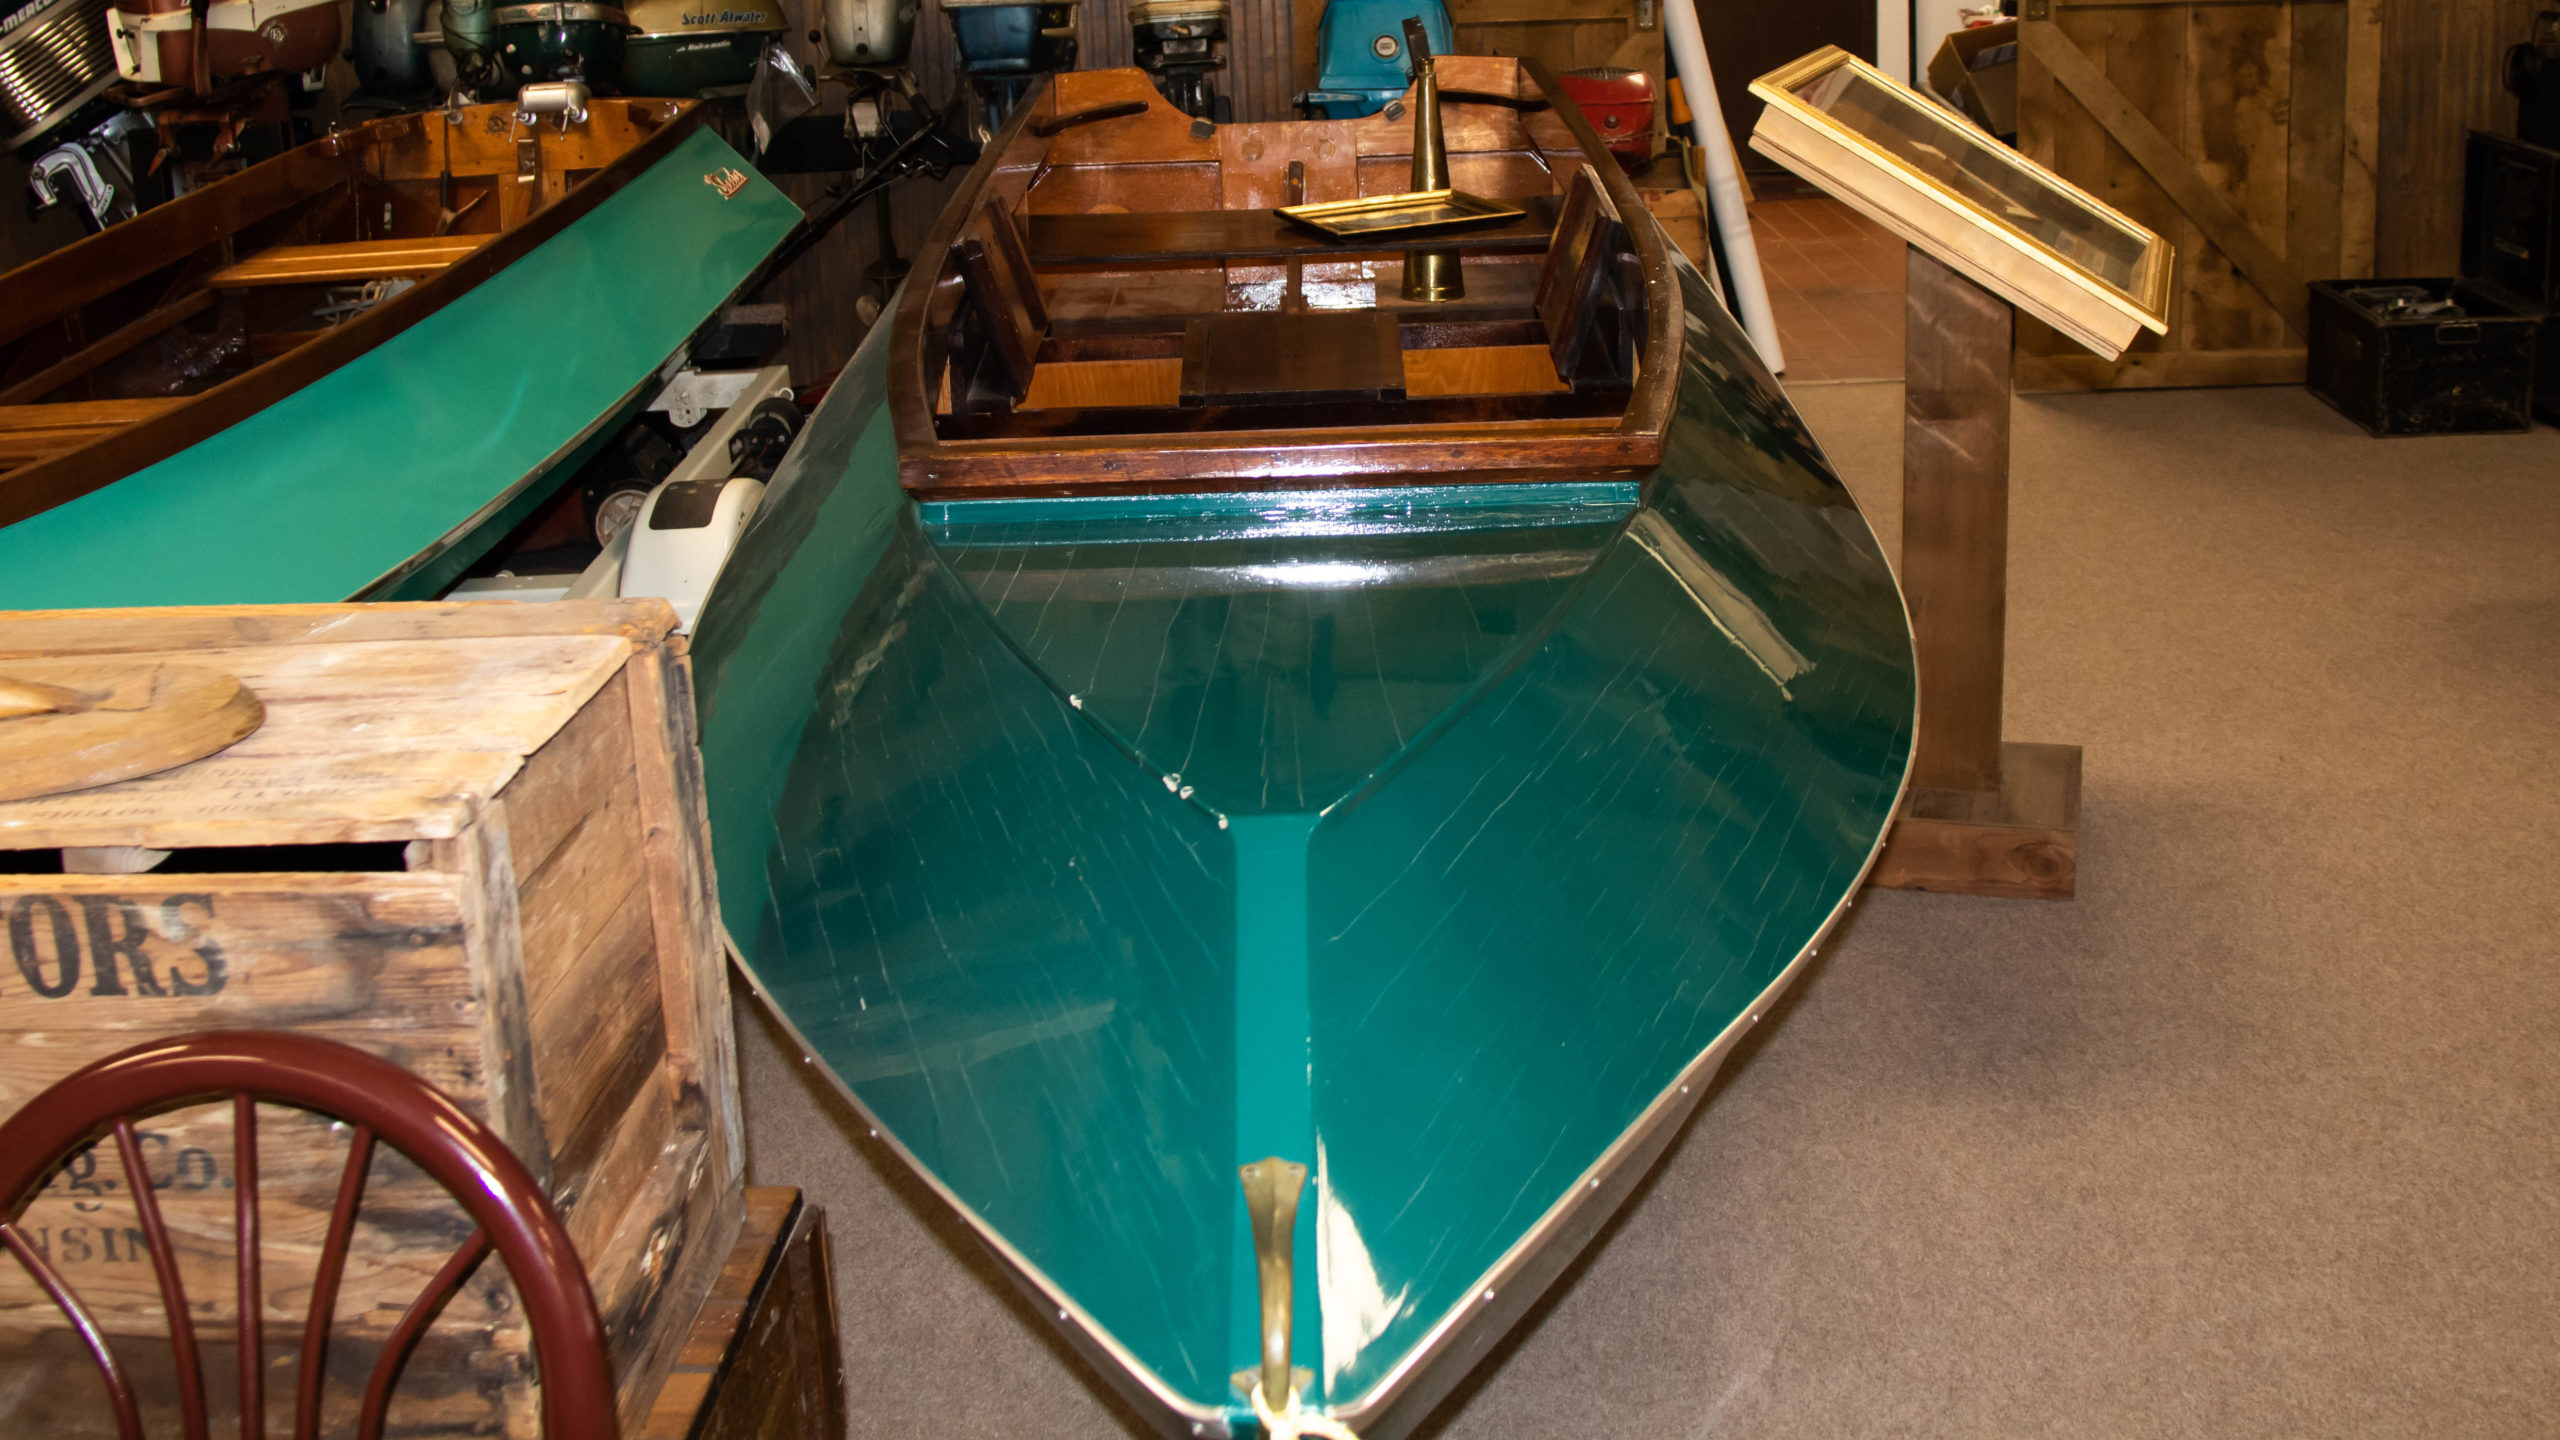 201019 Skeeter1 the 1st Bass Boat manufactured in the united state scaled - Get “hooked” at the History of Fishing Museum